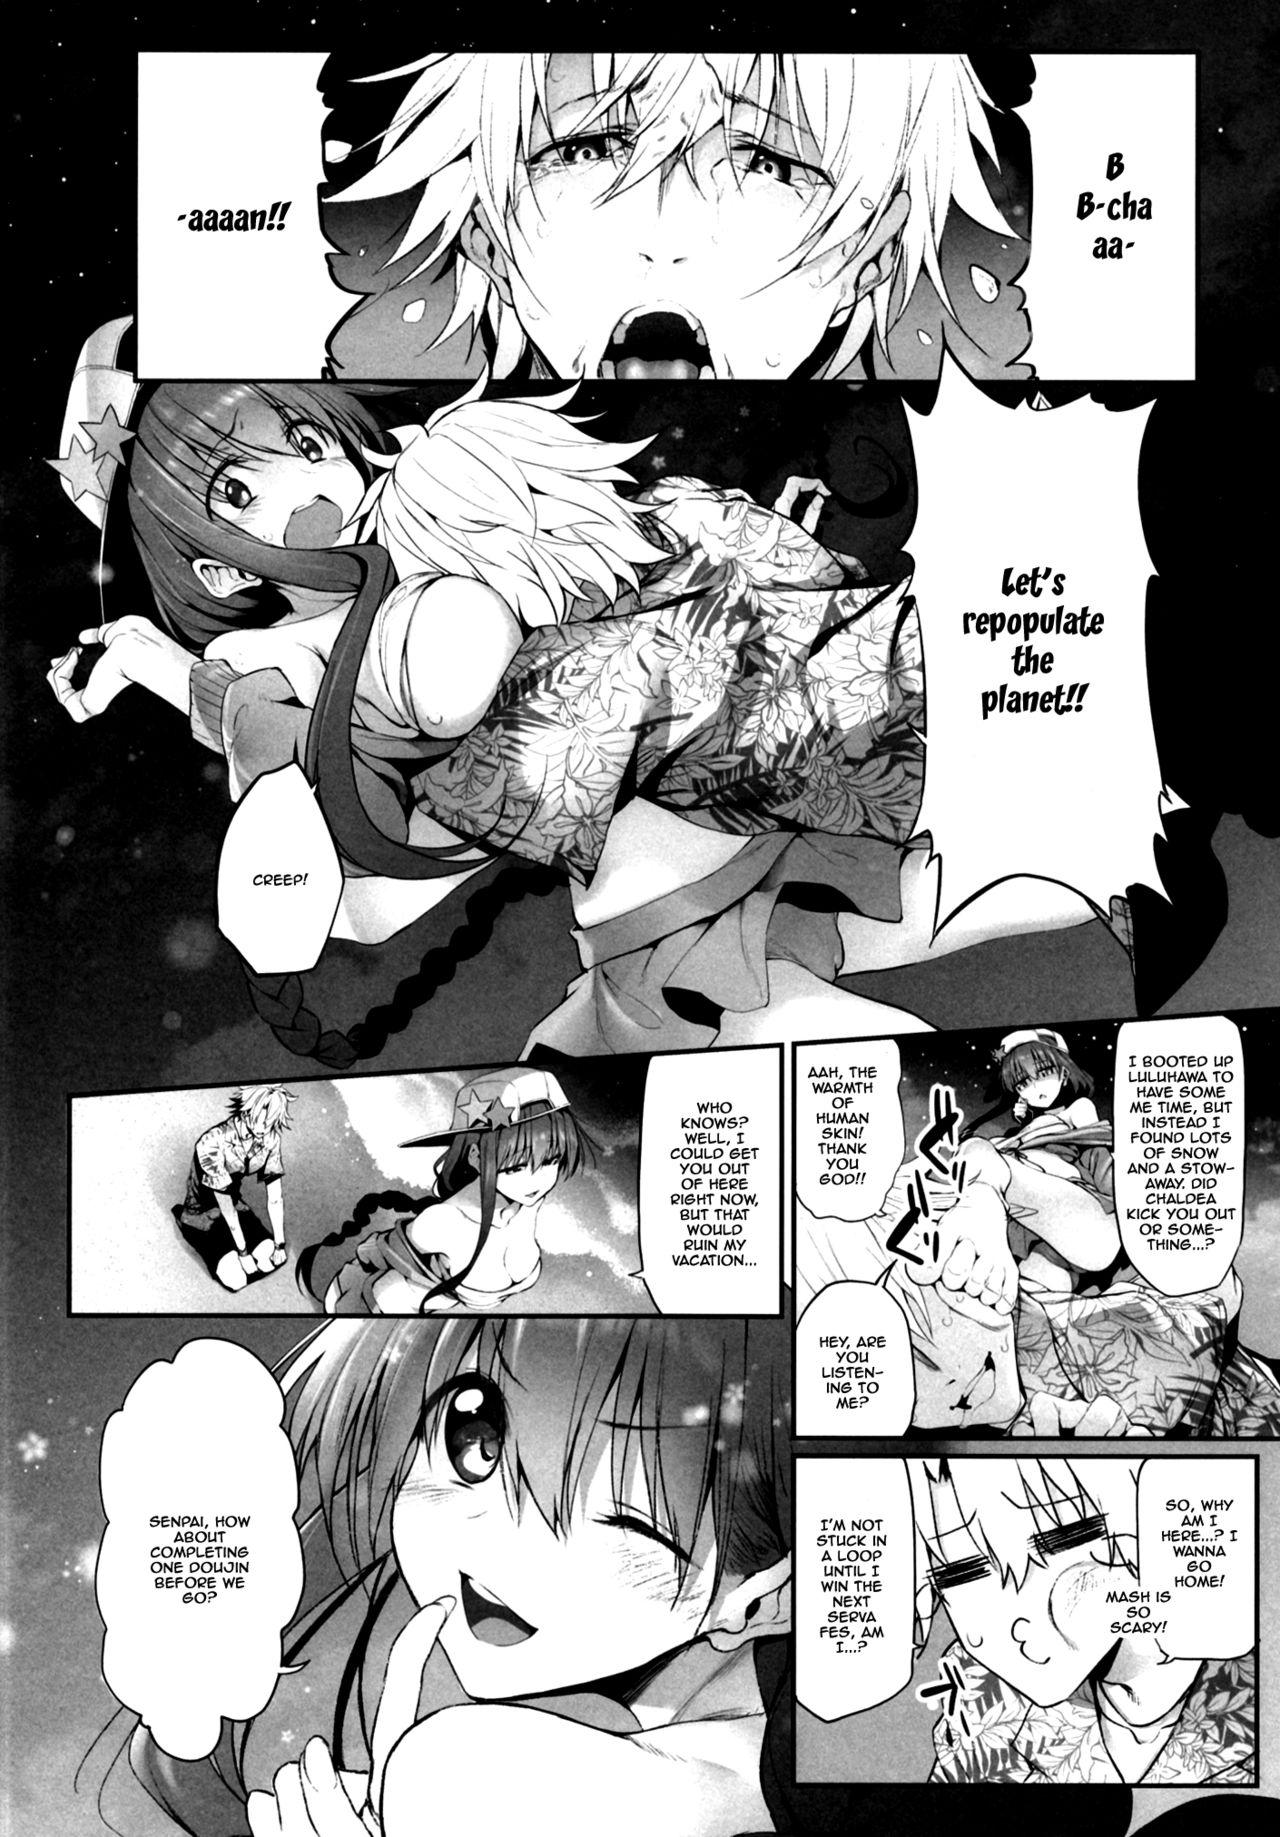 Busty Marked Girls Vol. 19 - Fate grand order Sextape - Page 5